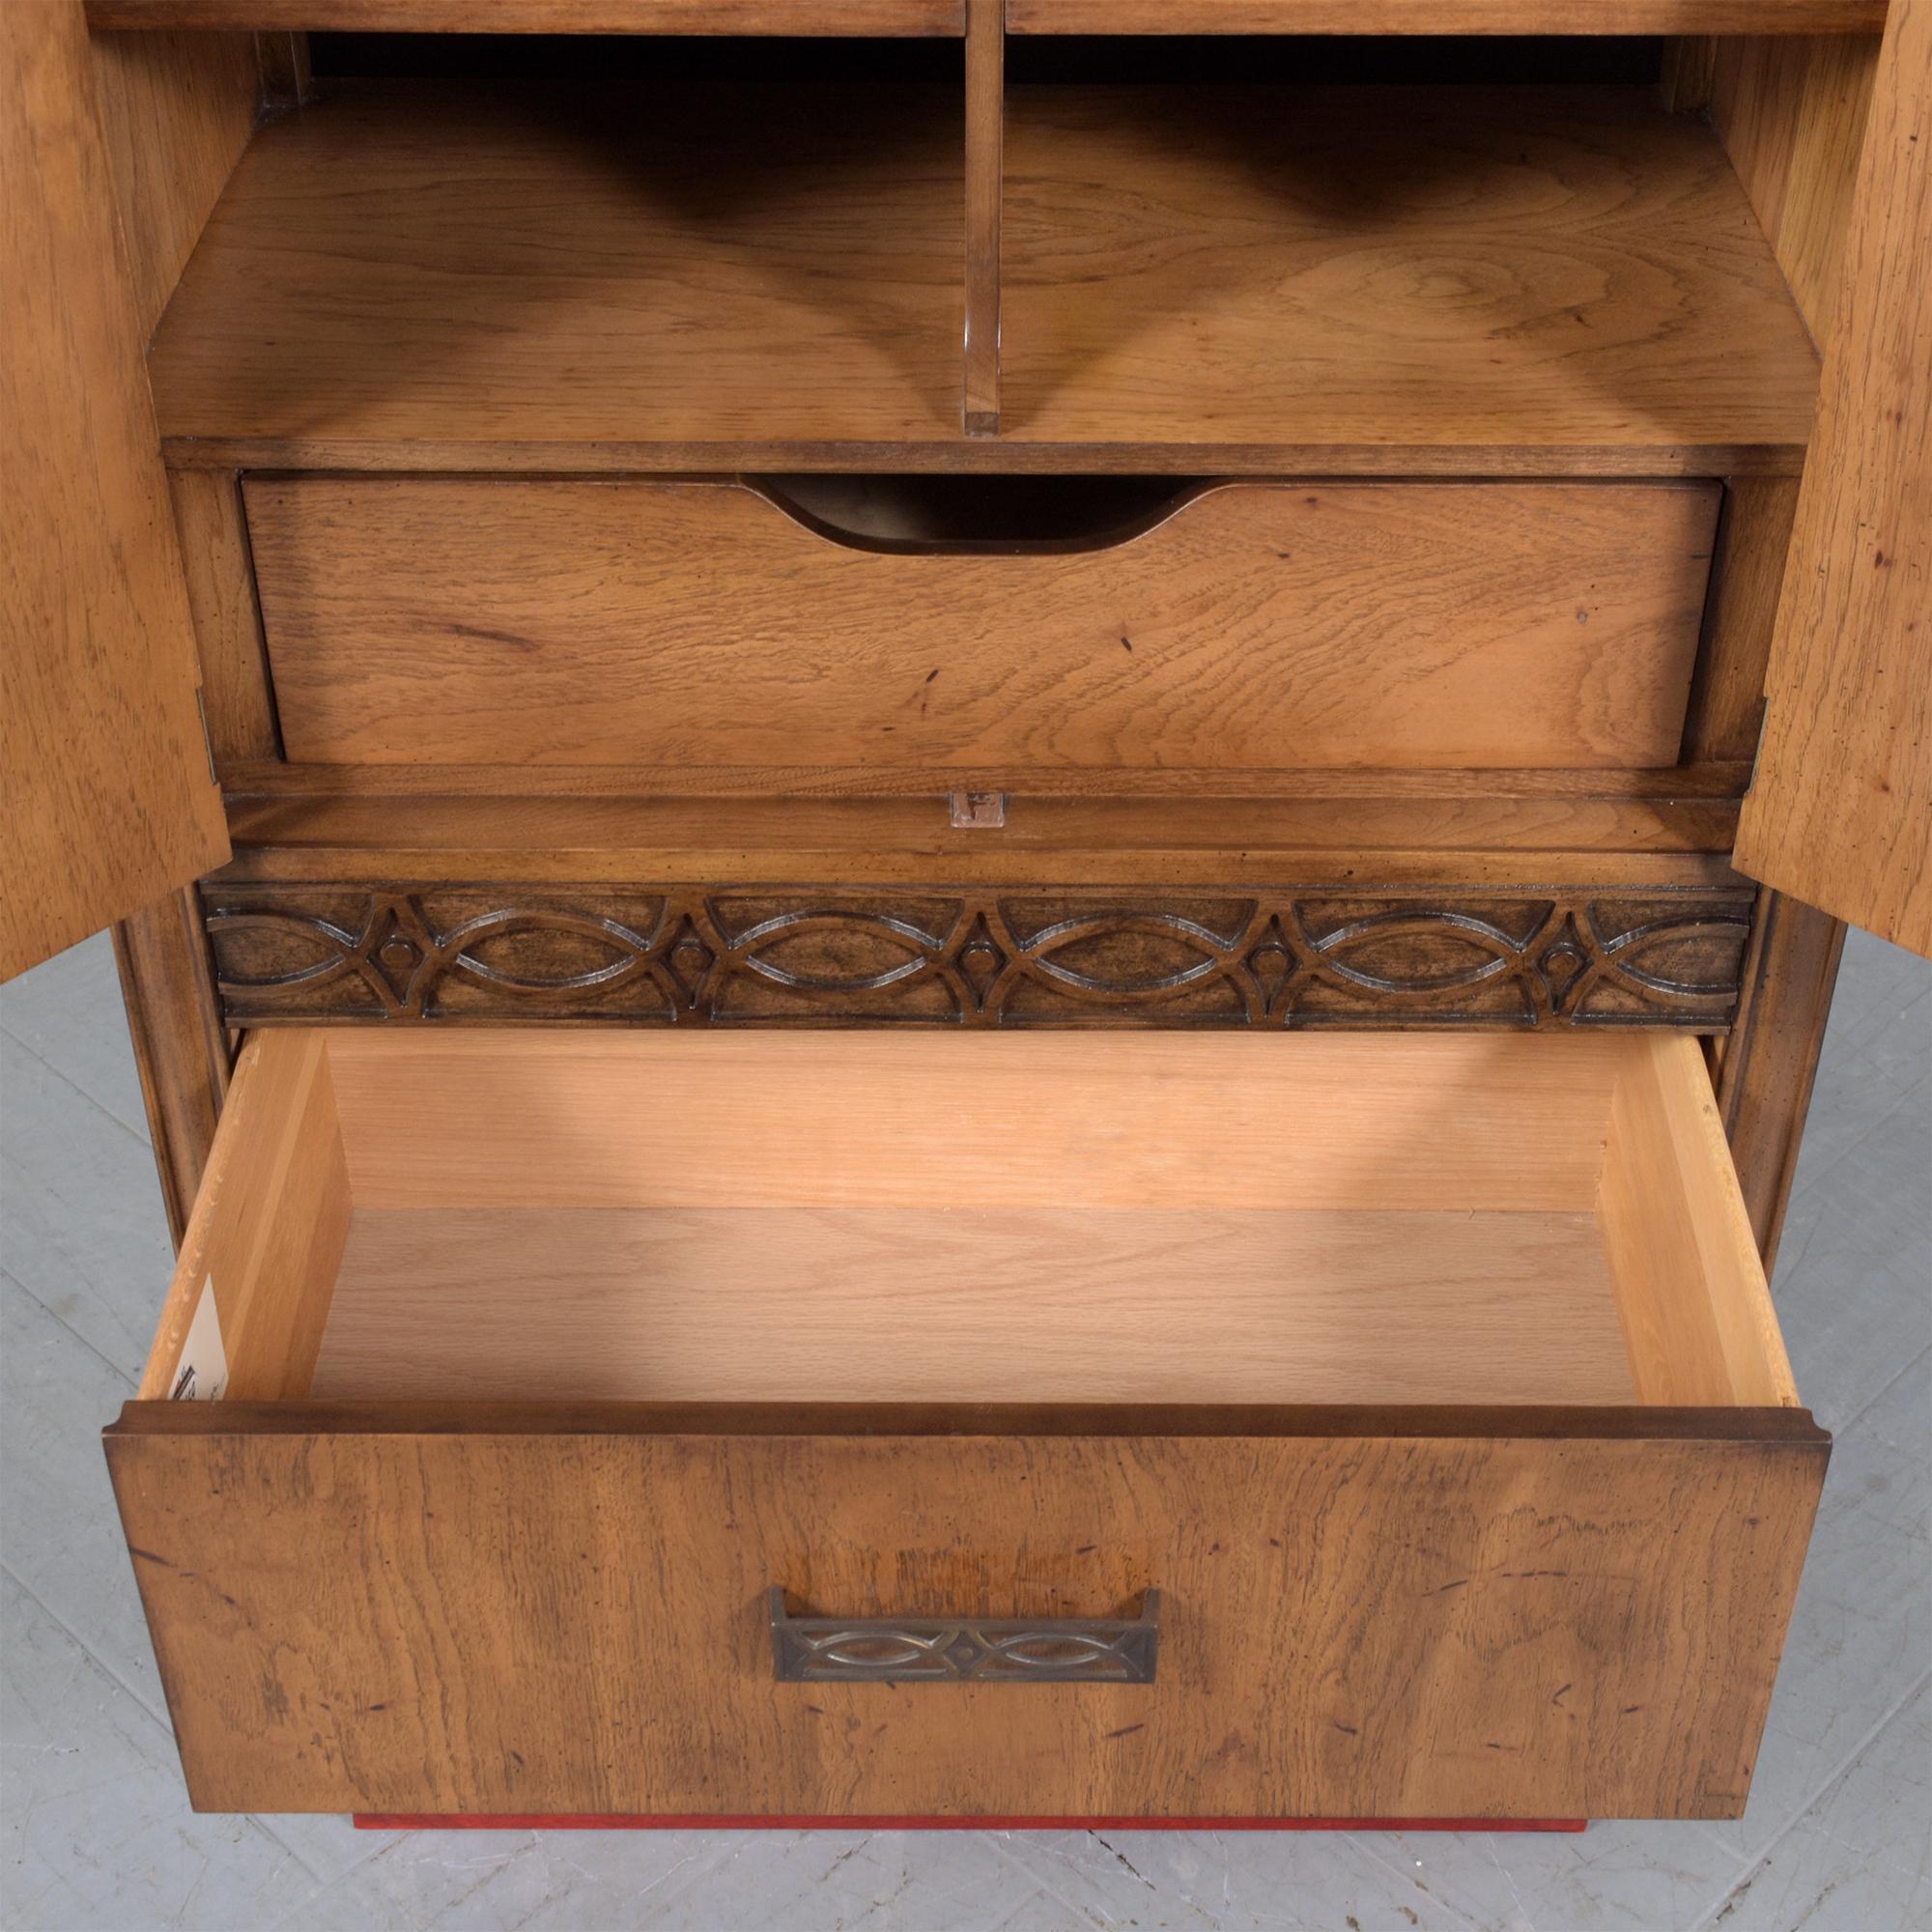 Stunning 1960s Mid-Century Modern Walnut Bachelor Chest with Sculpted Details For Sale 3